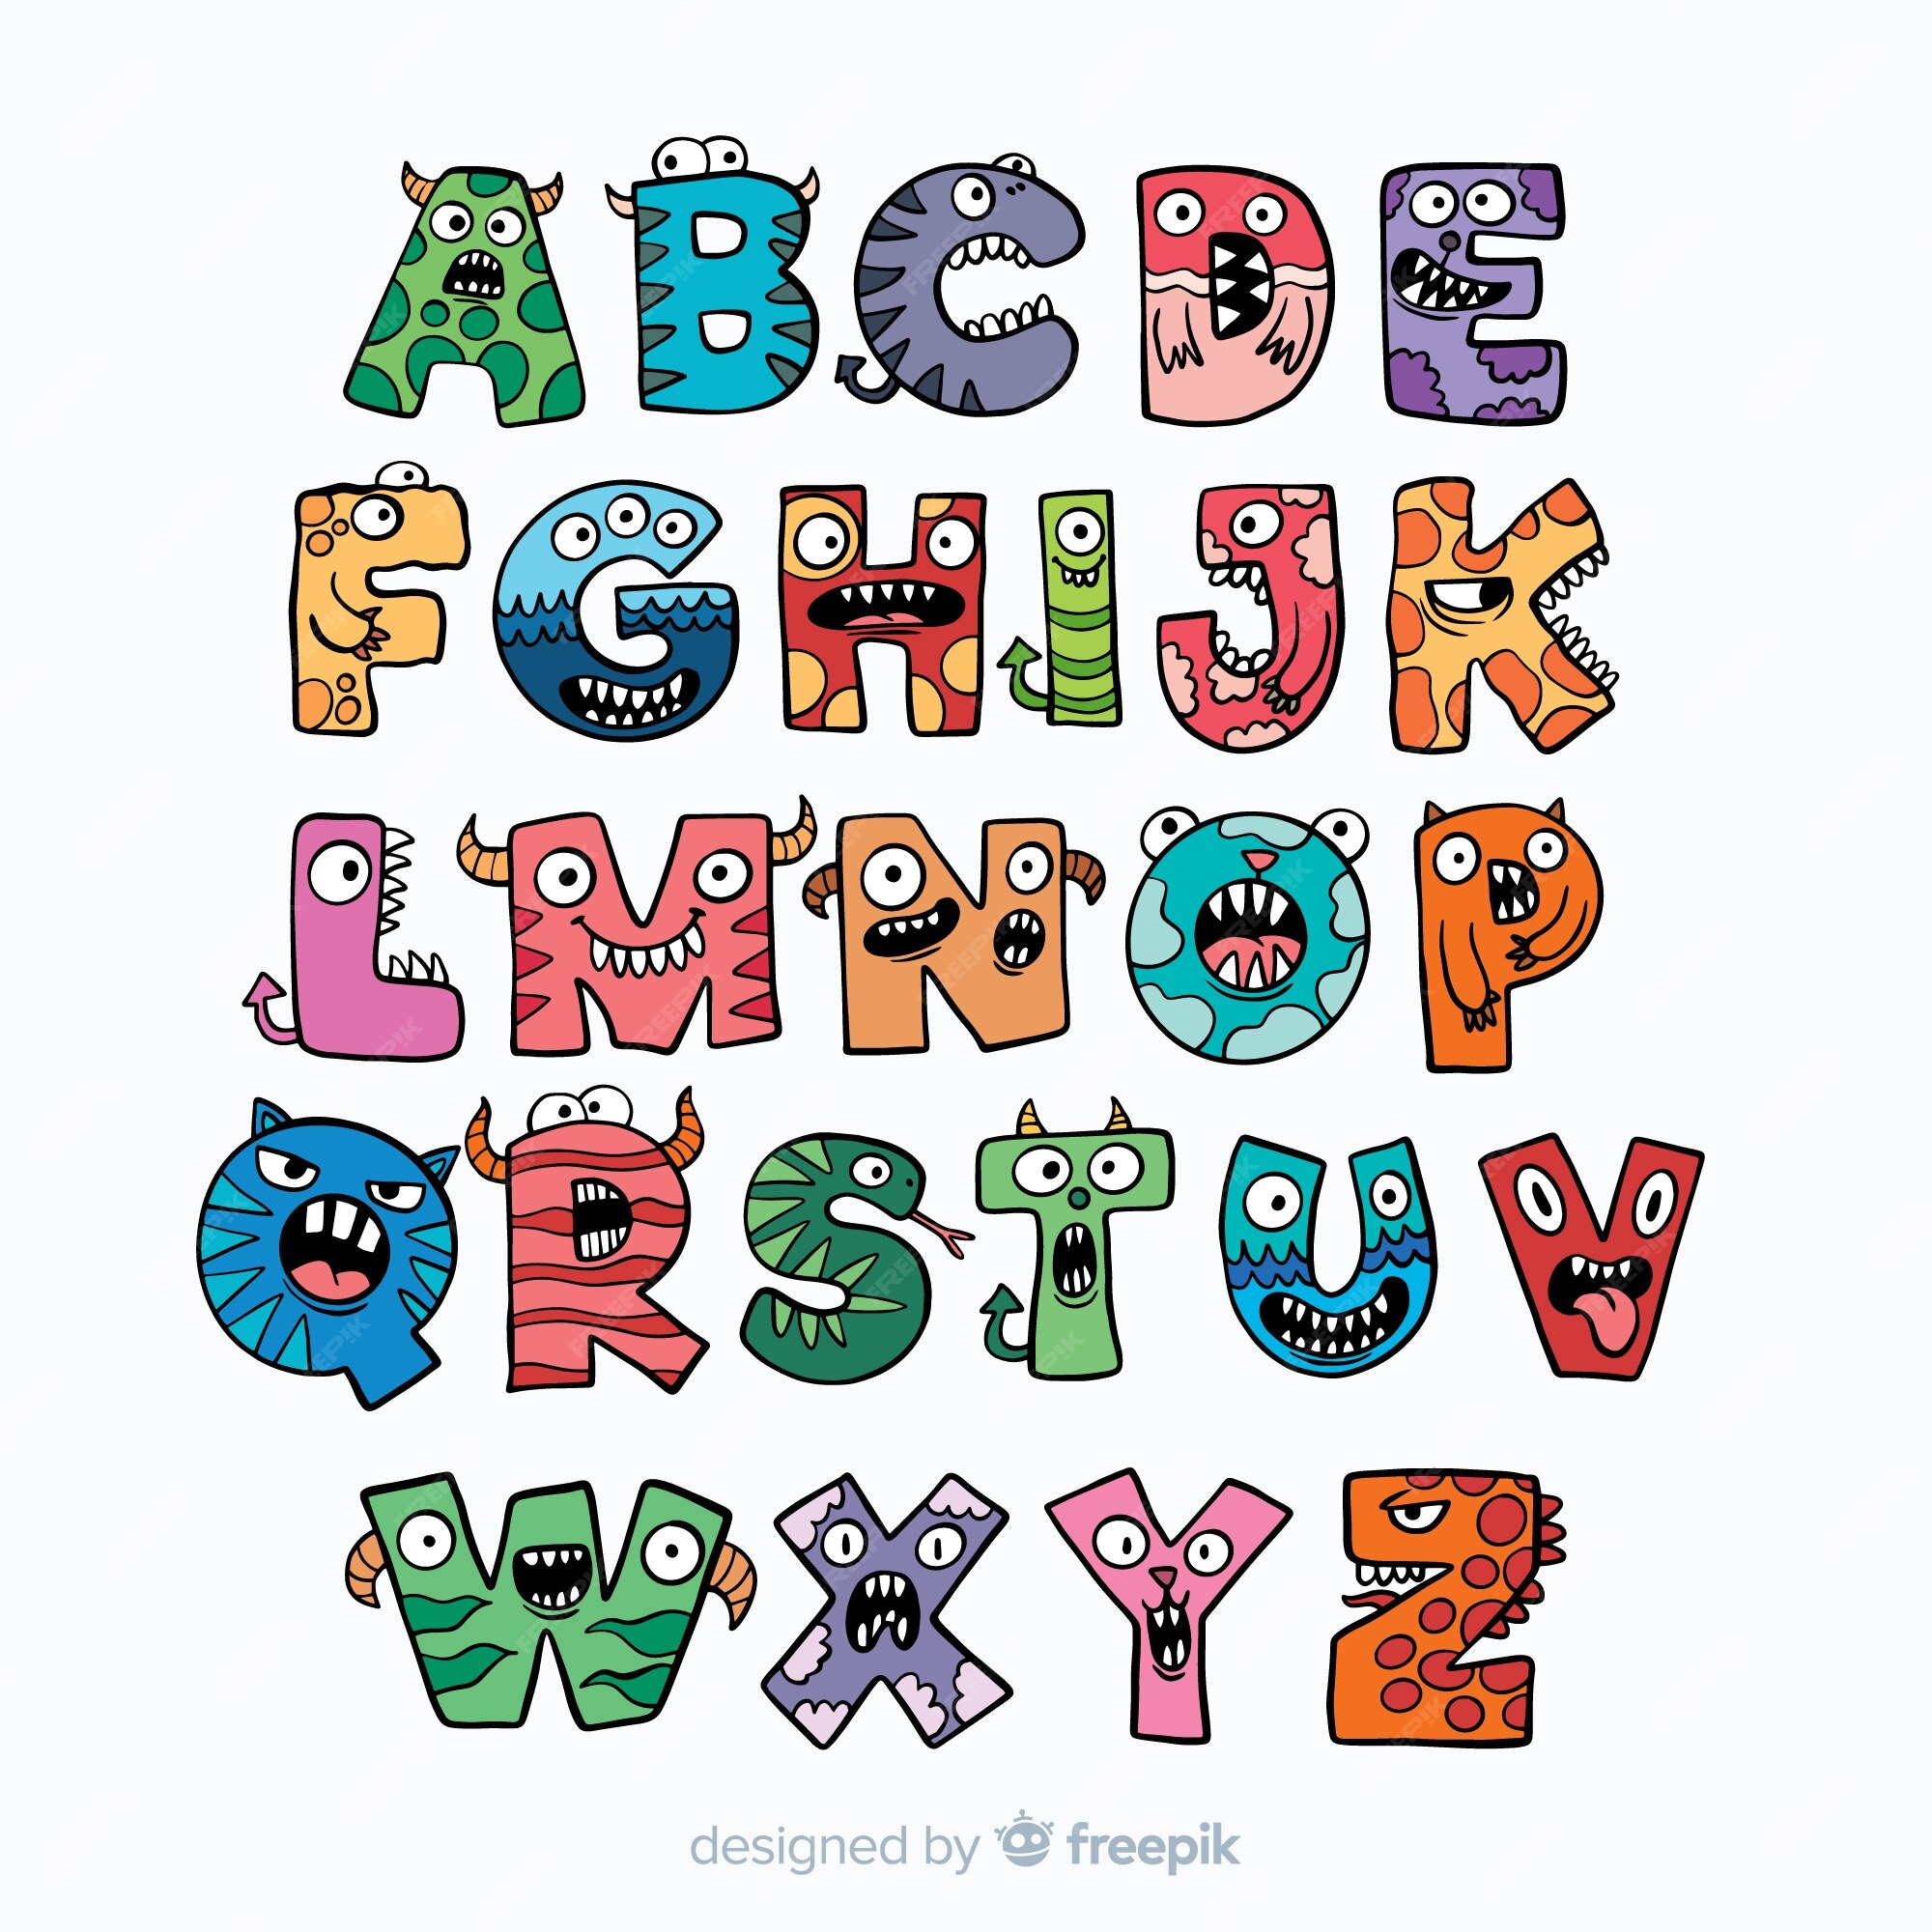 english-alphabet-vector-hd-png-images-cartoon-english-alphabets-for